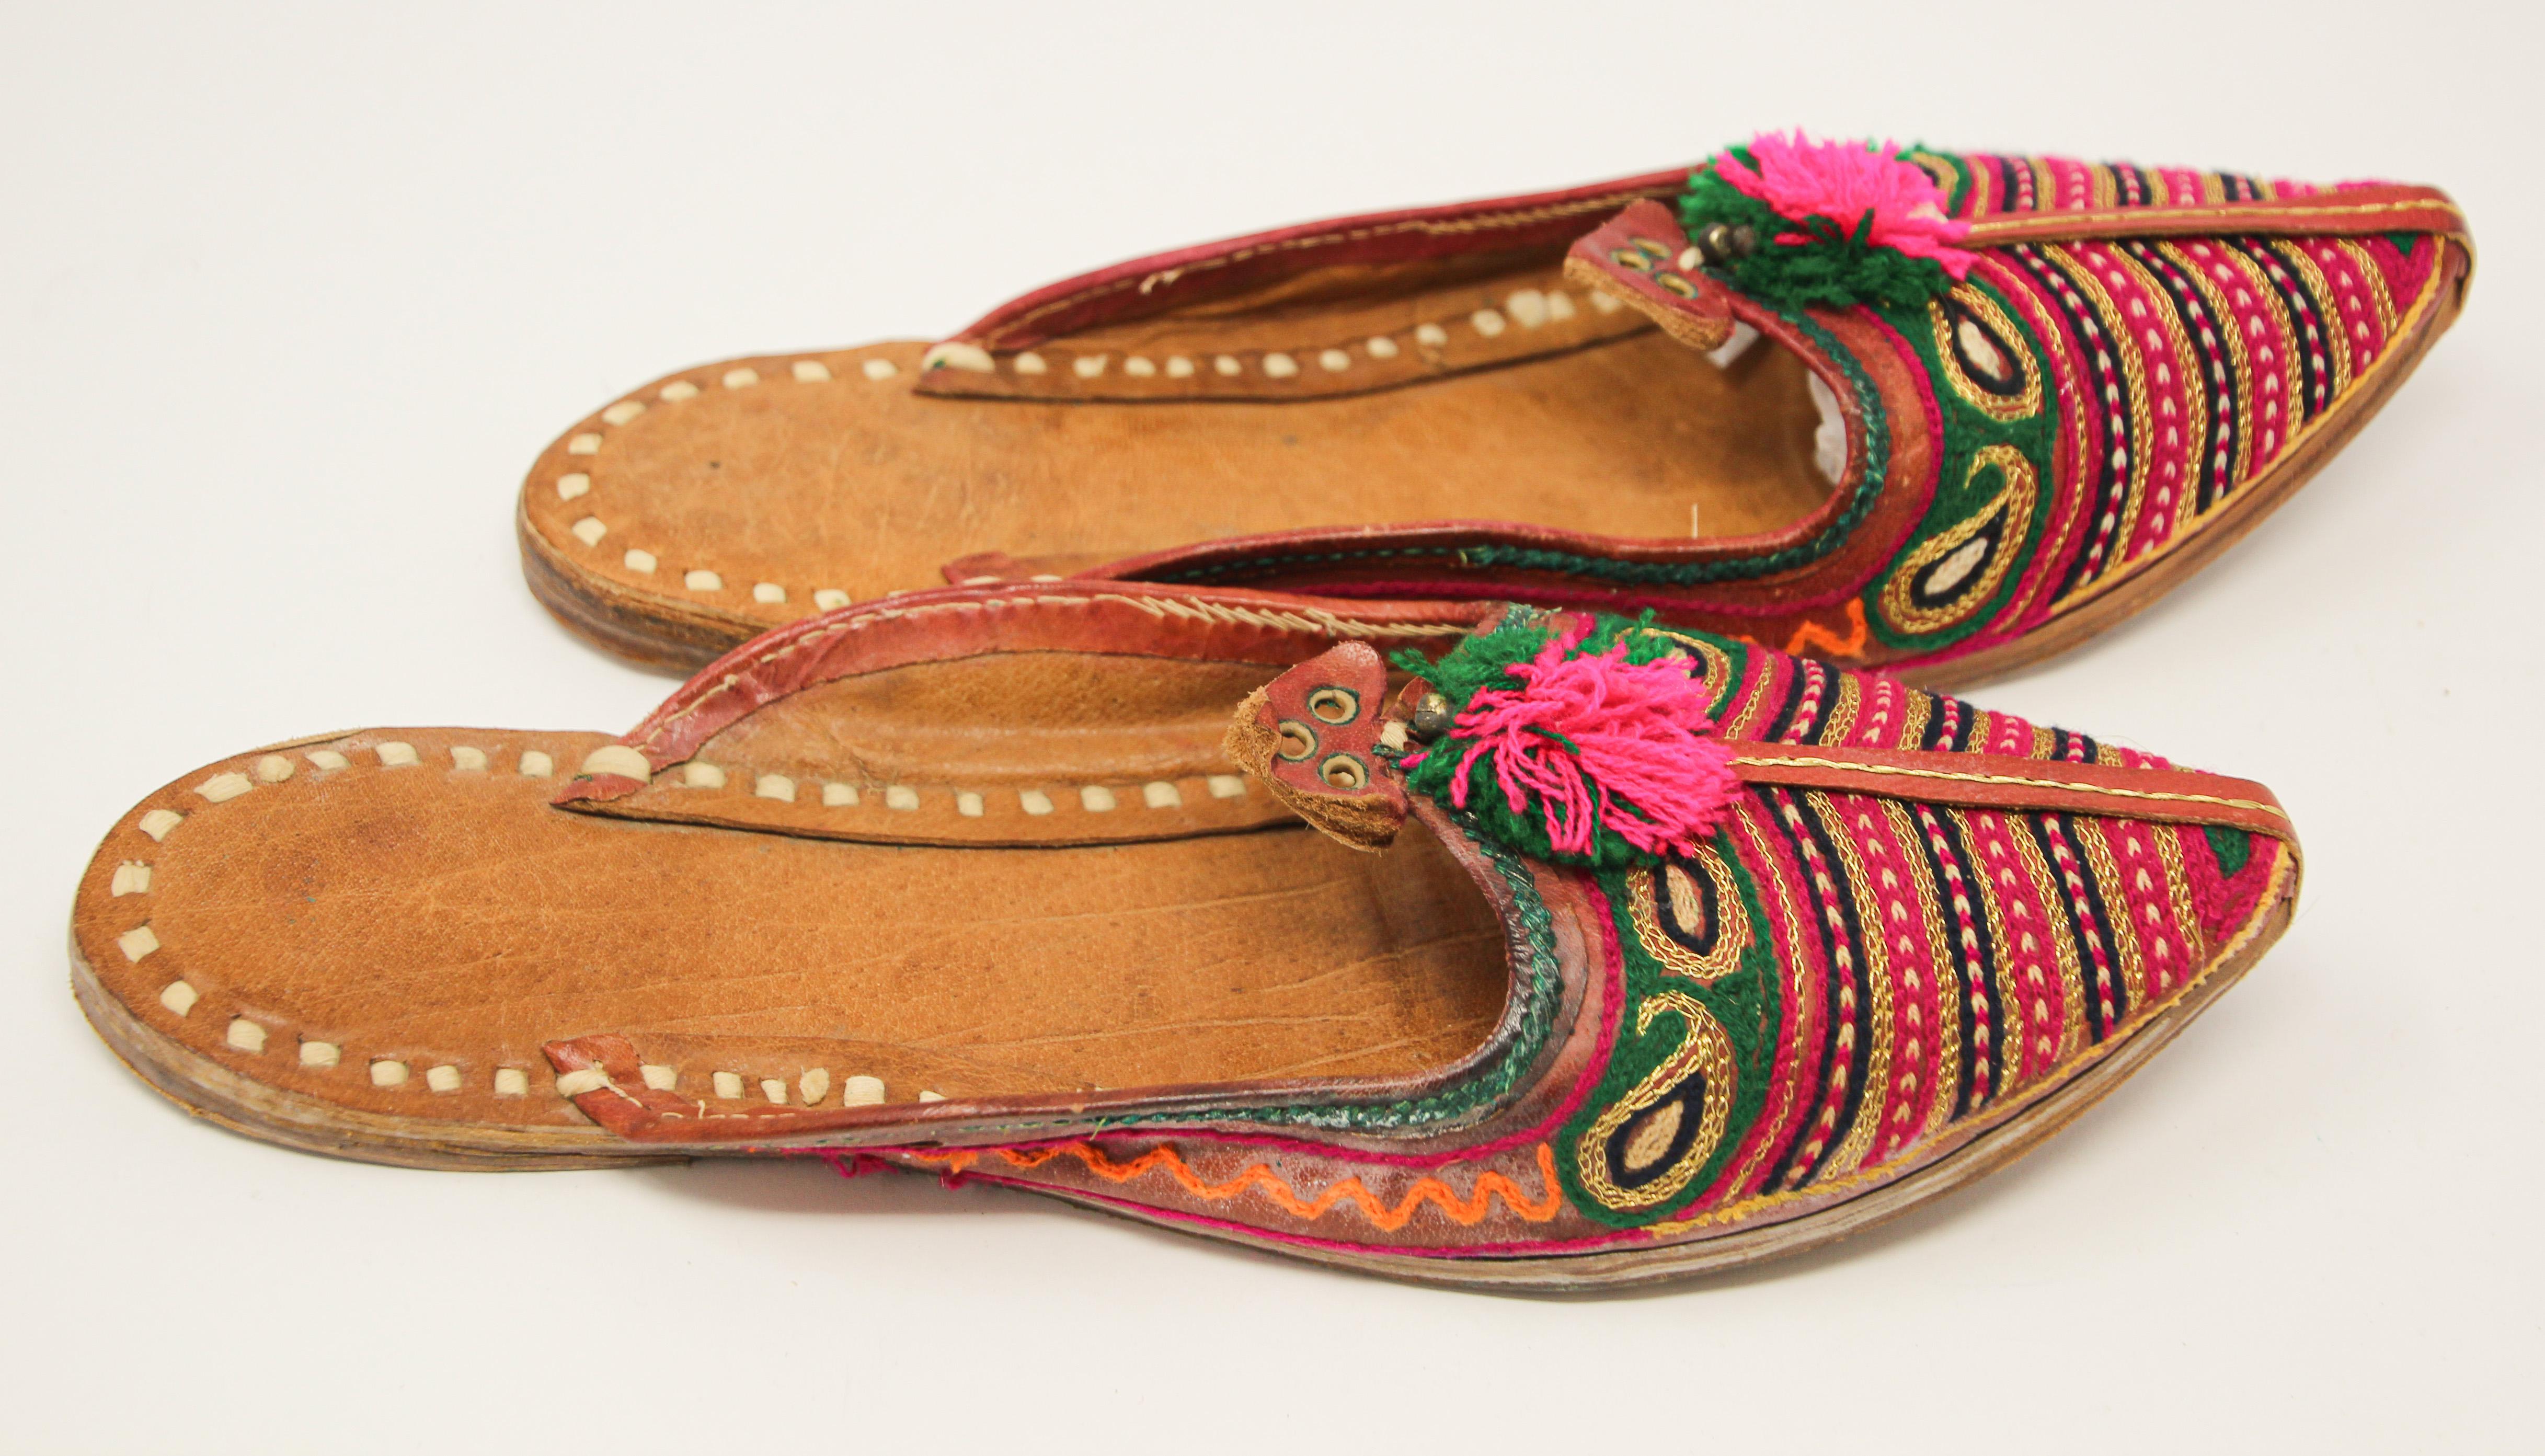 Vintage Moorish Turkish ethnic leather slippers with intricate gold embroideries pointed toe.
Leather hand sewn and embroidered with colorful thread.
Great pair of exotic ethnic flat loafers, slippers to use for your next Moroccan, Arabian night